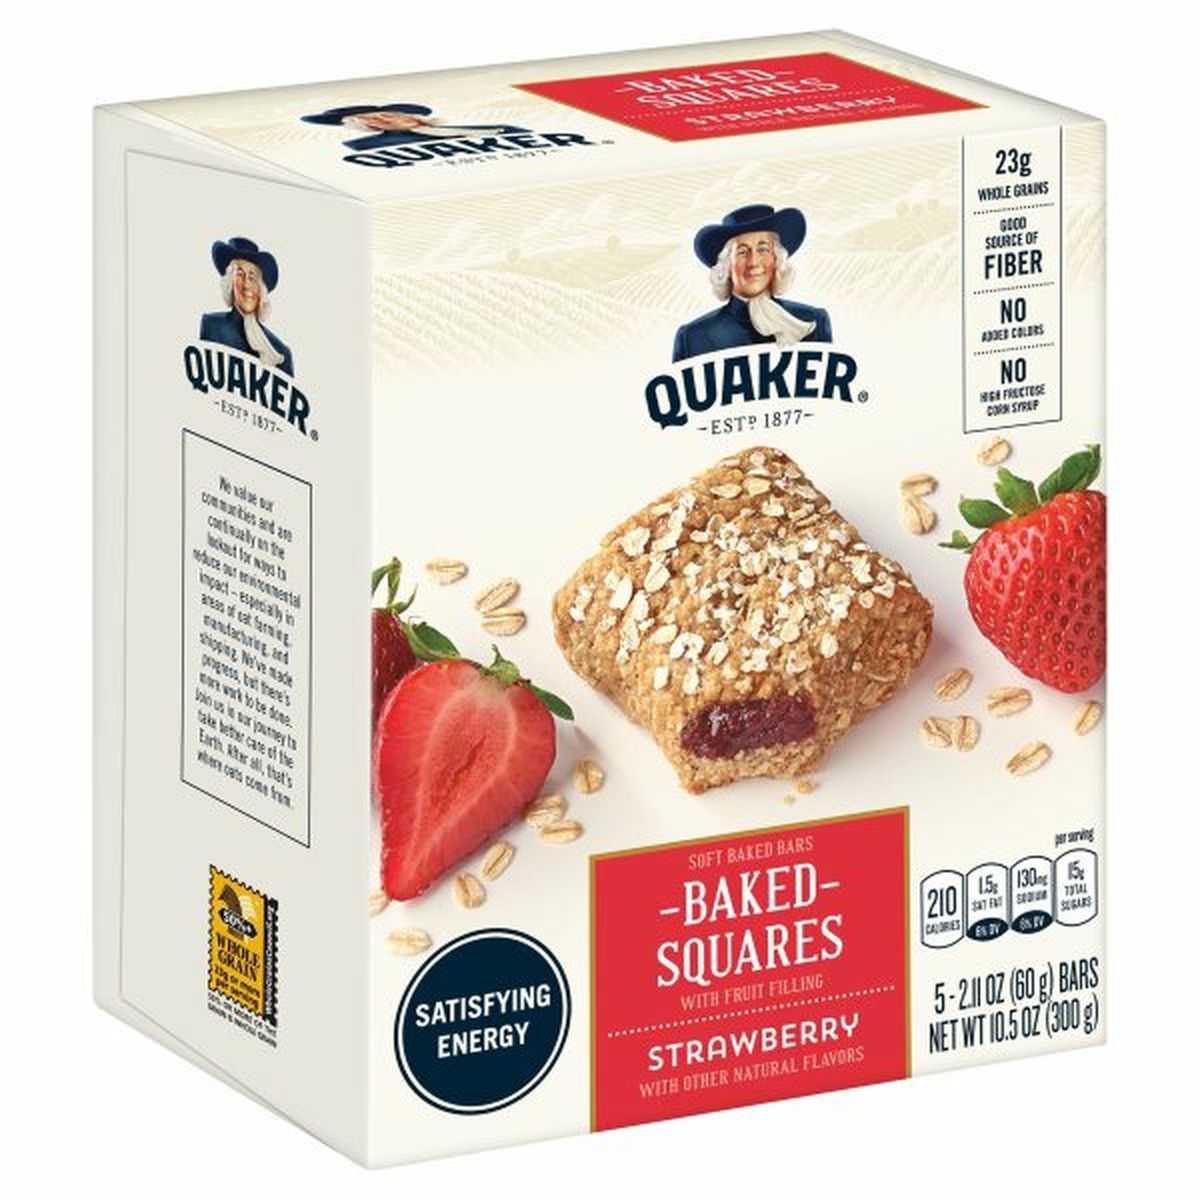 Calories in Quaker Baked Squares Granola Cereal Or Fruit Bars, Strawberry with Other Natural Flavors